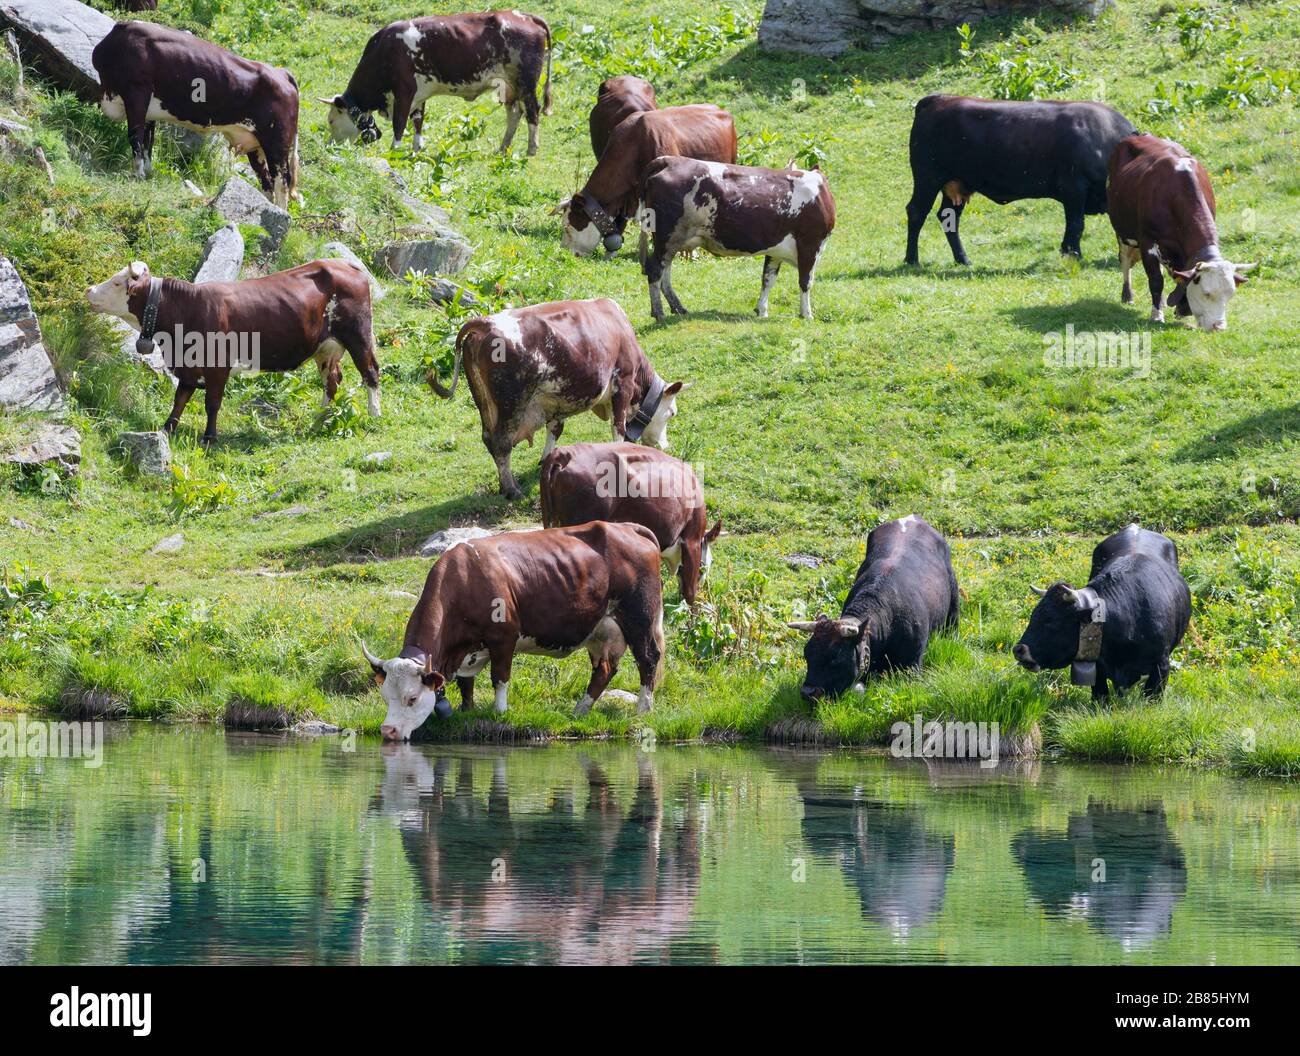 Cattle drinking from the Blue Lake (Lago Blu) near Valtournenche, Aosta Province, Italy. Stock Photo